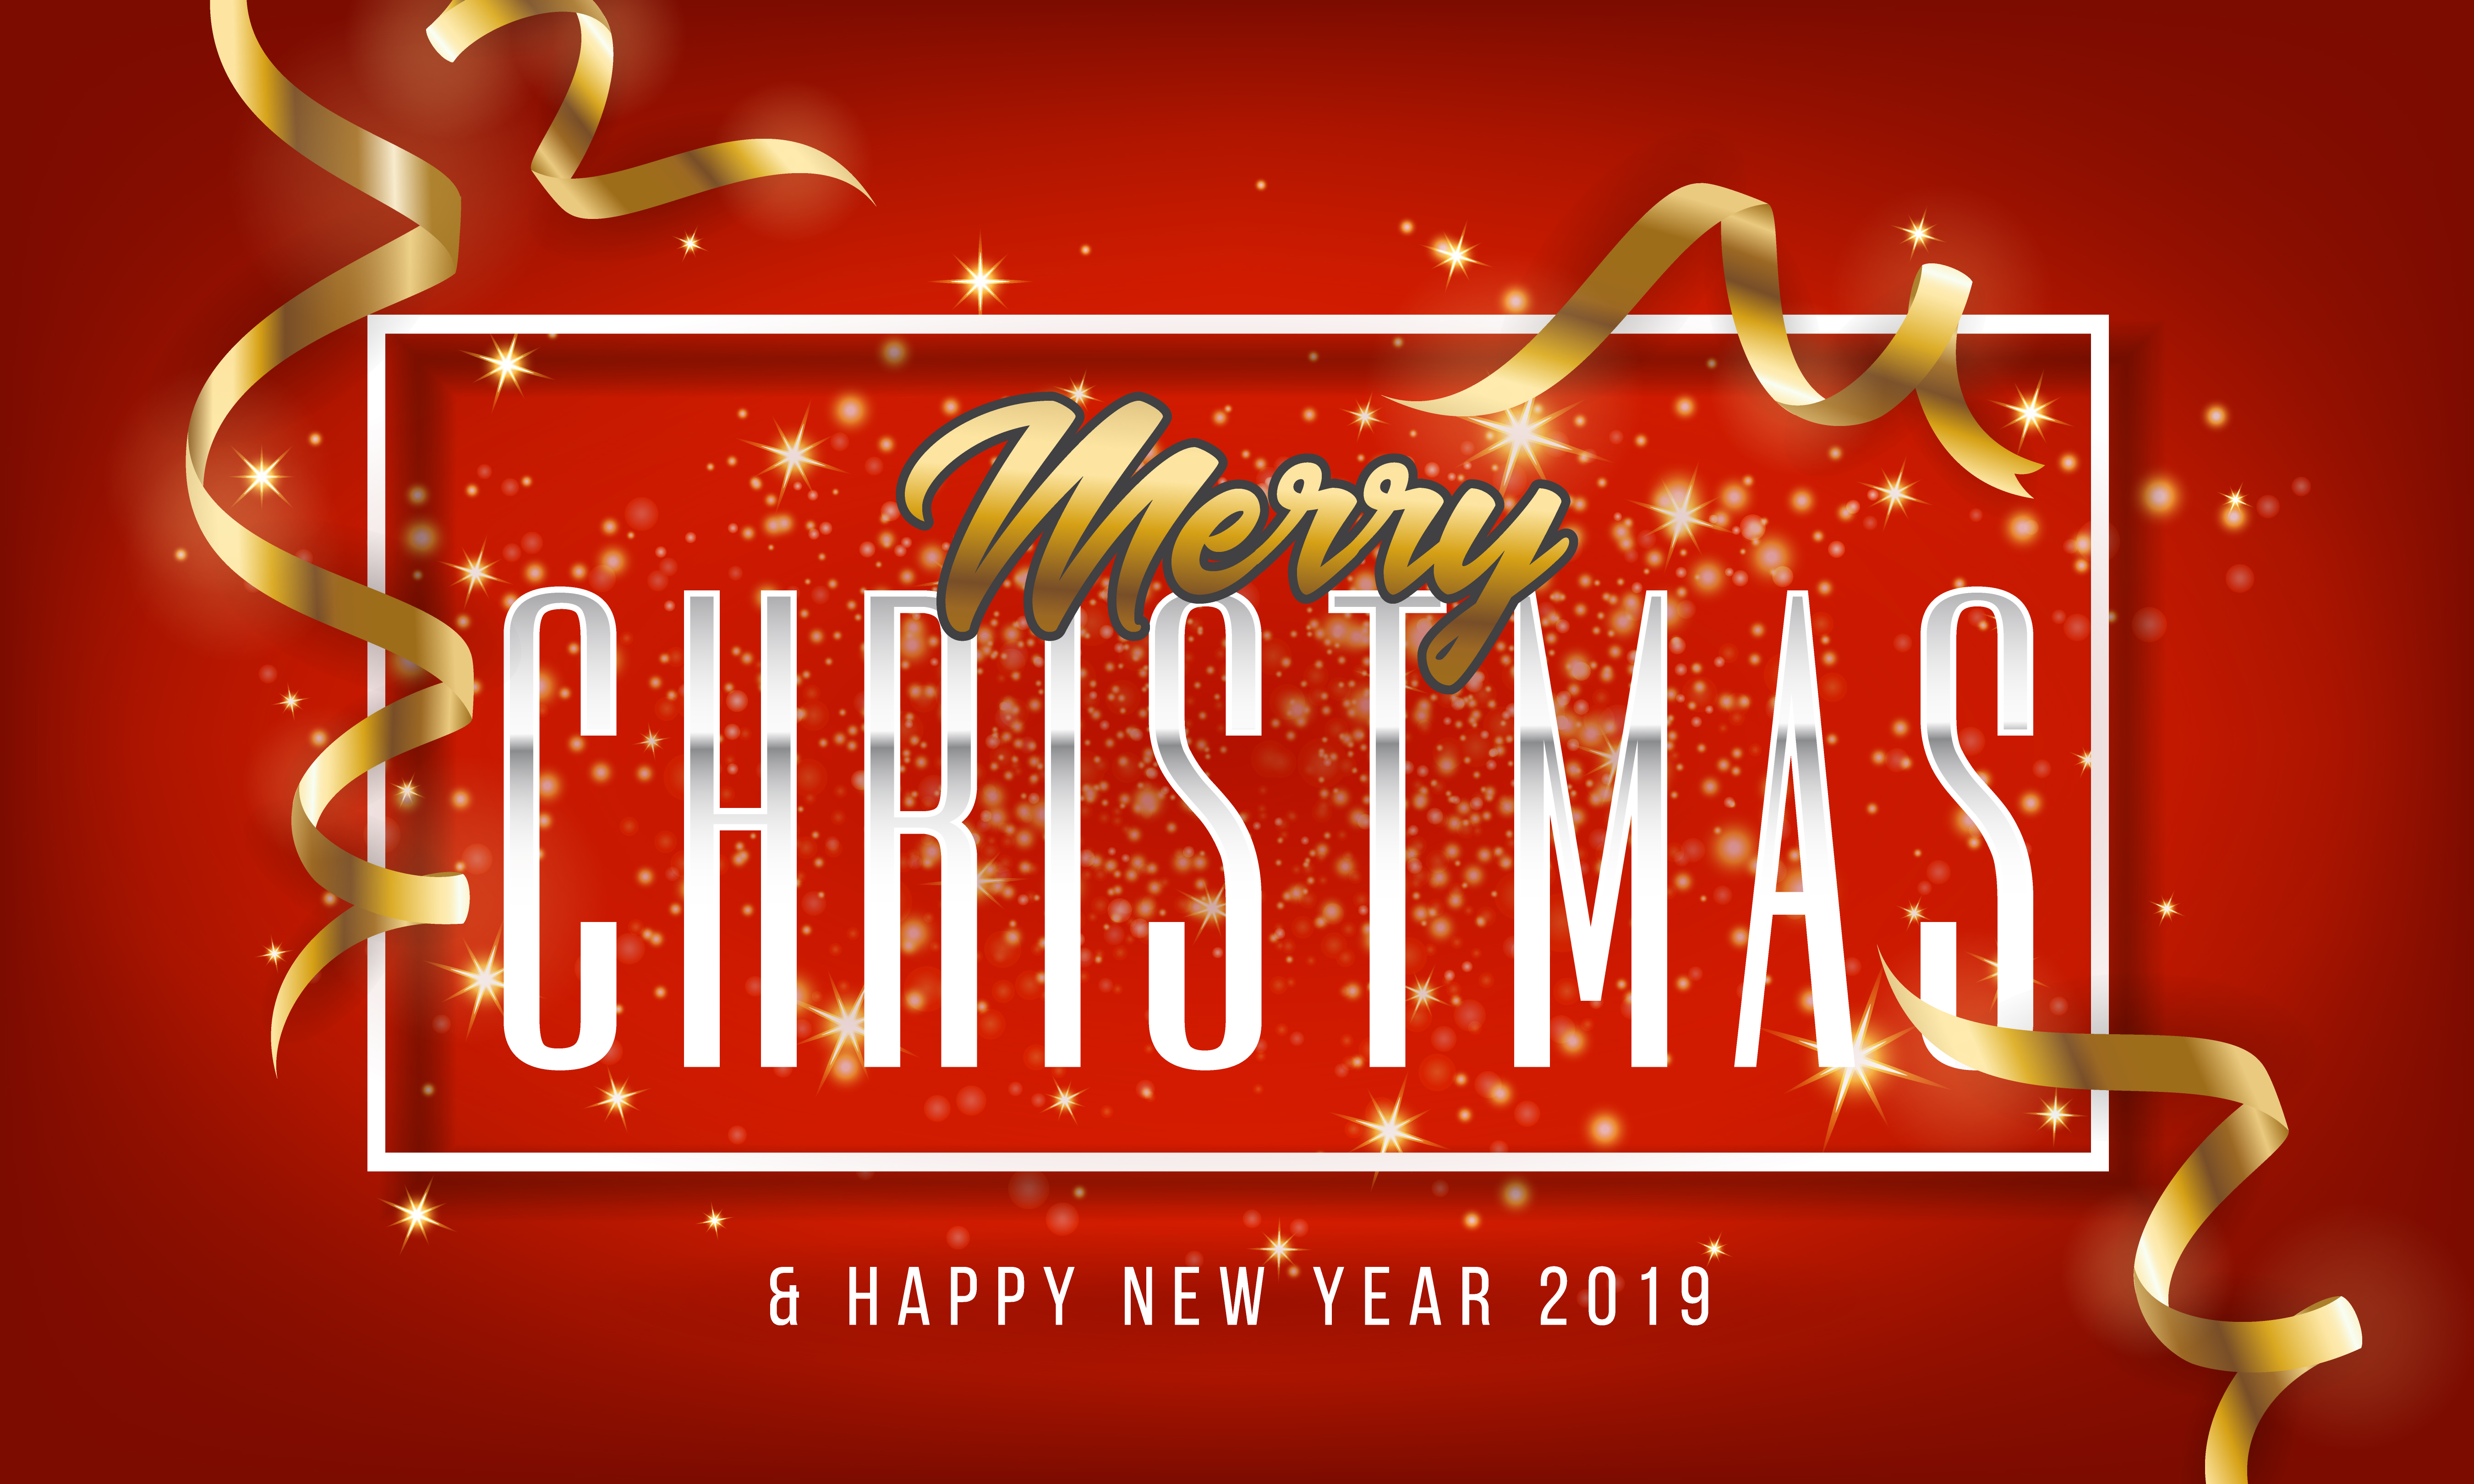 Merry Christmas and Happy New Year 2019 Greeting Card Background - Download Free Vectors ...